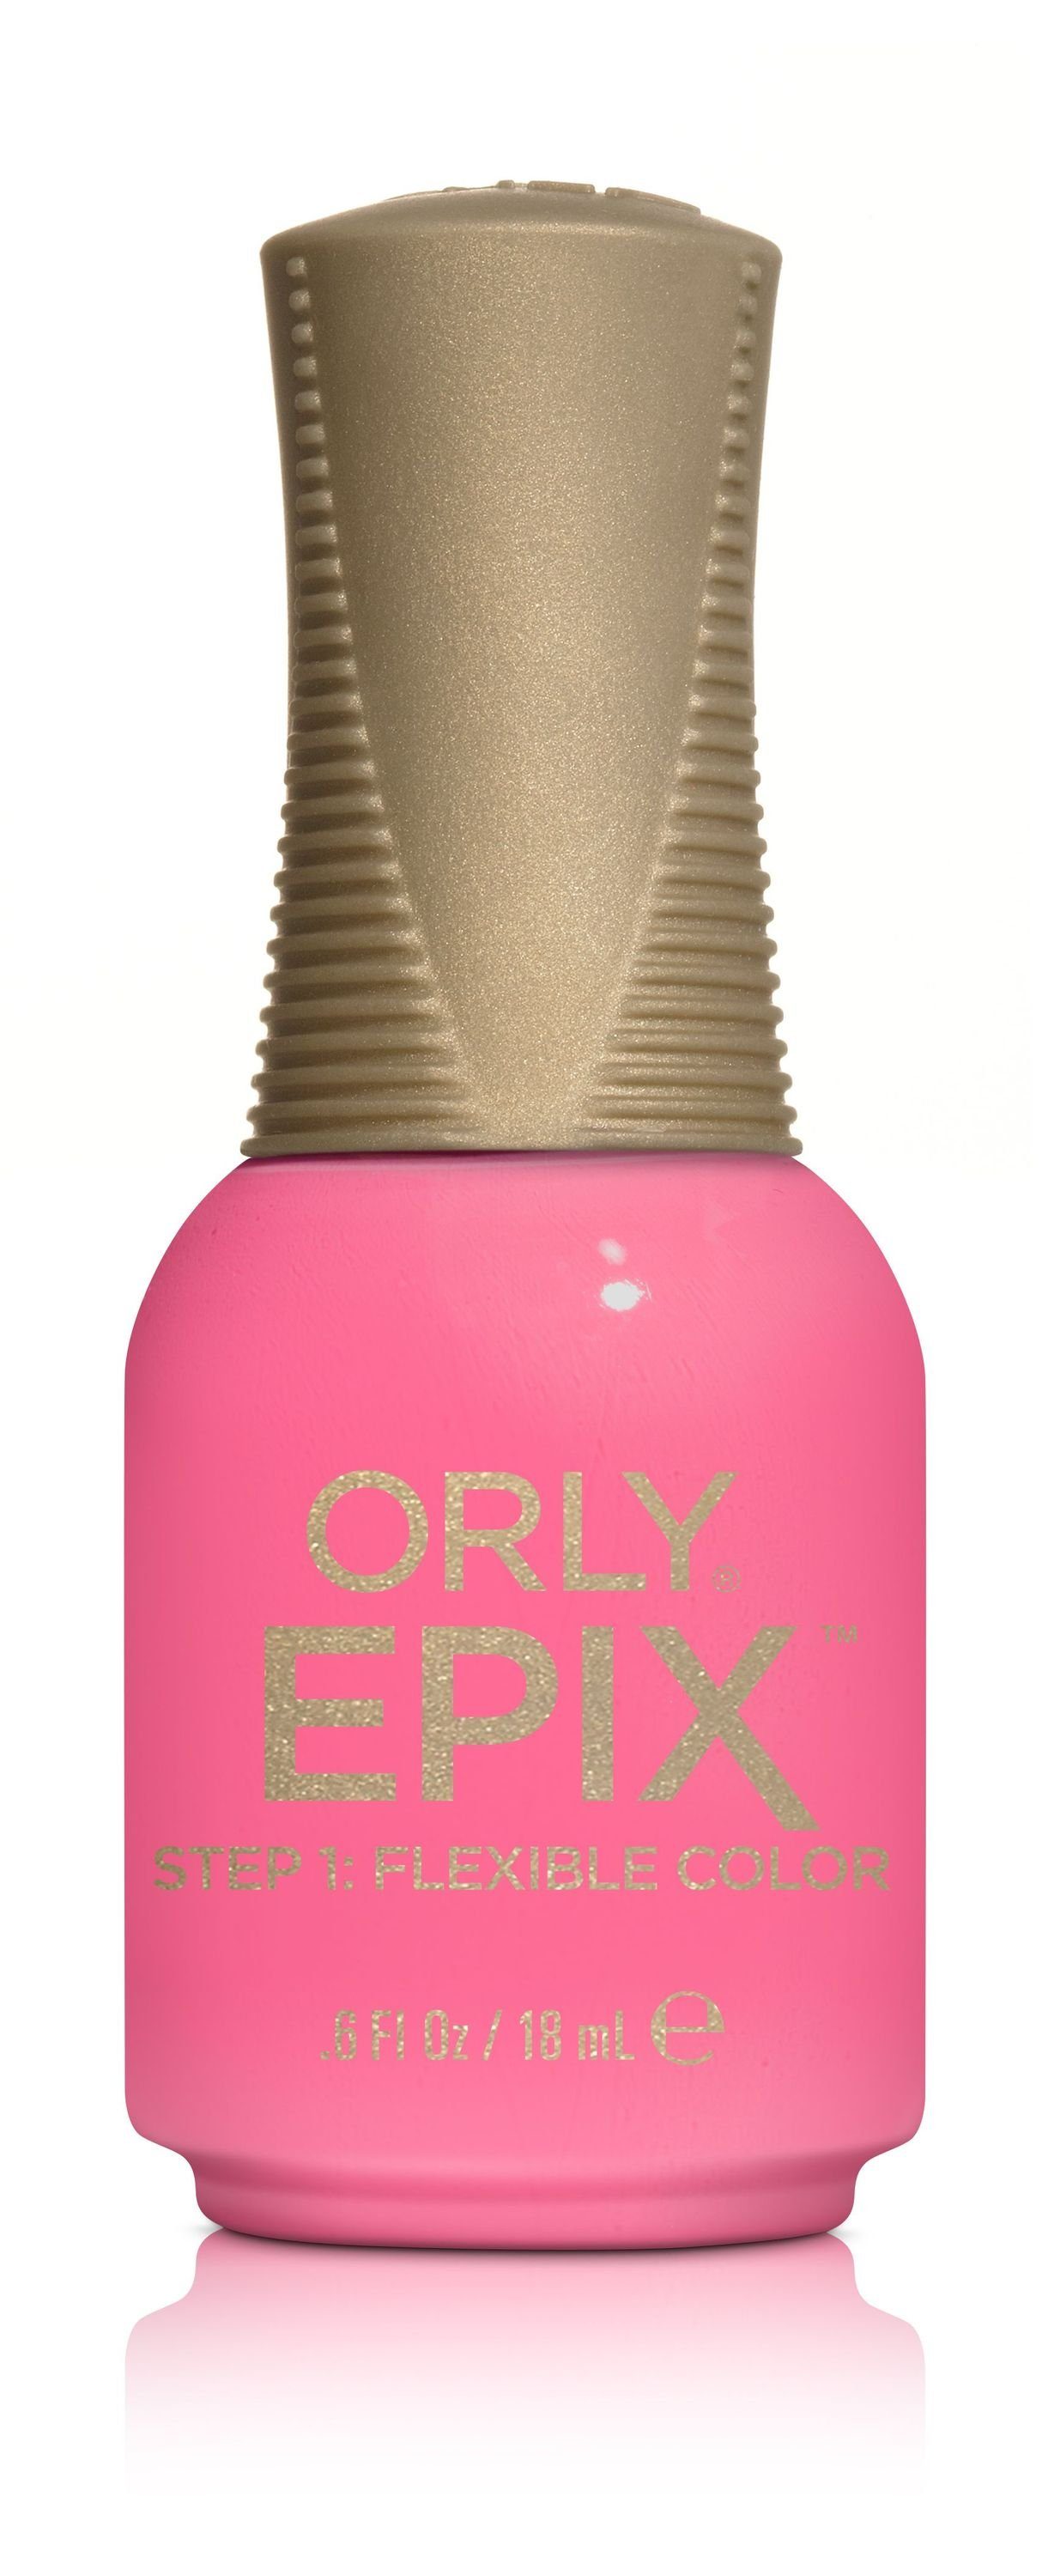 Nagellack Flexible Your ML - ORLY 18 Know Color EPIX - ORLY Angle,